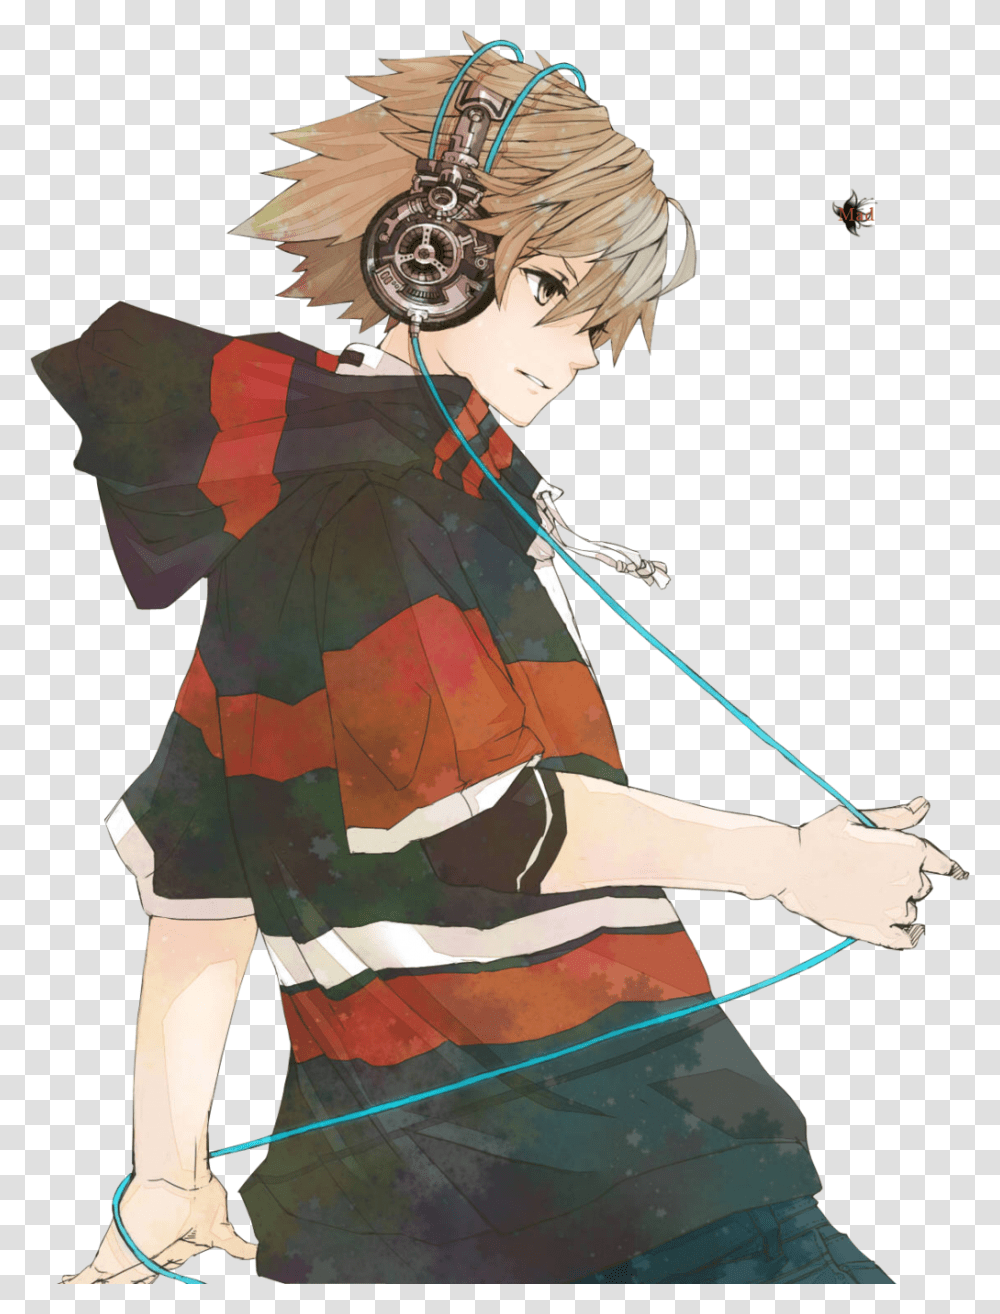 Anime Boy Is Listening Music Image Anime Boy Listening To Music, Person, Manga, Comics, Book Transparent Png